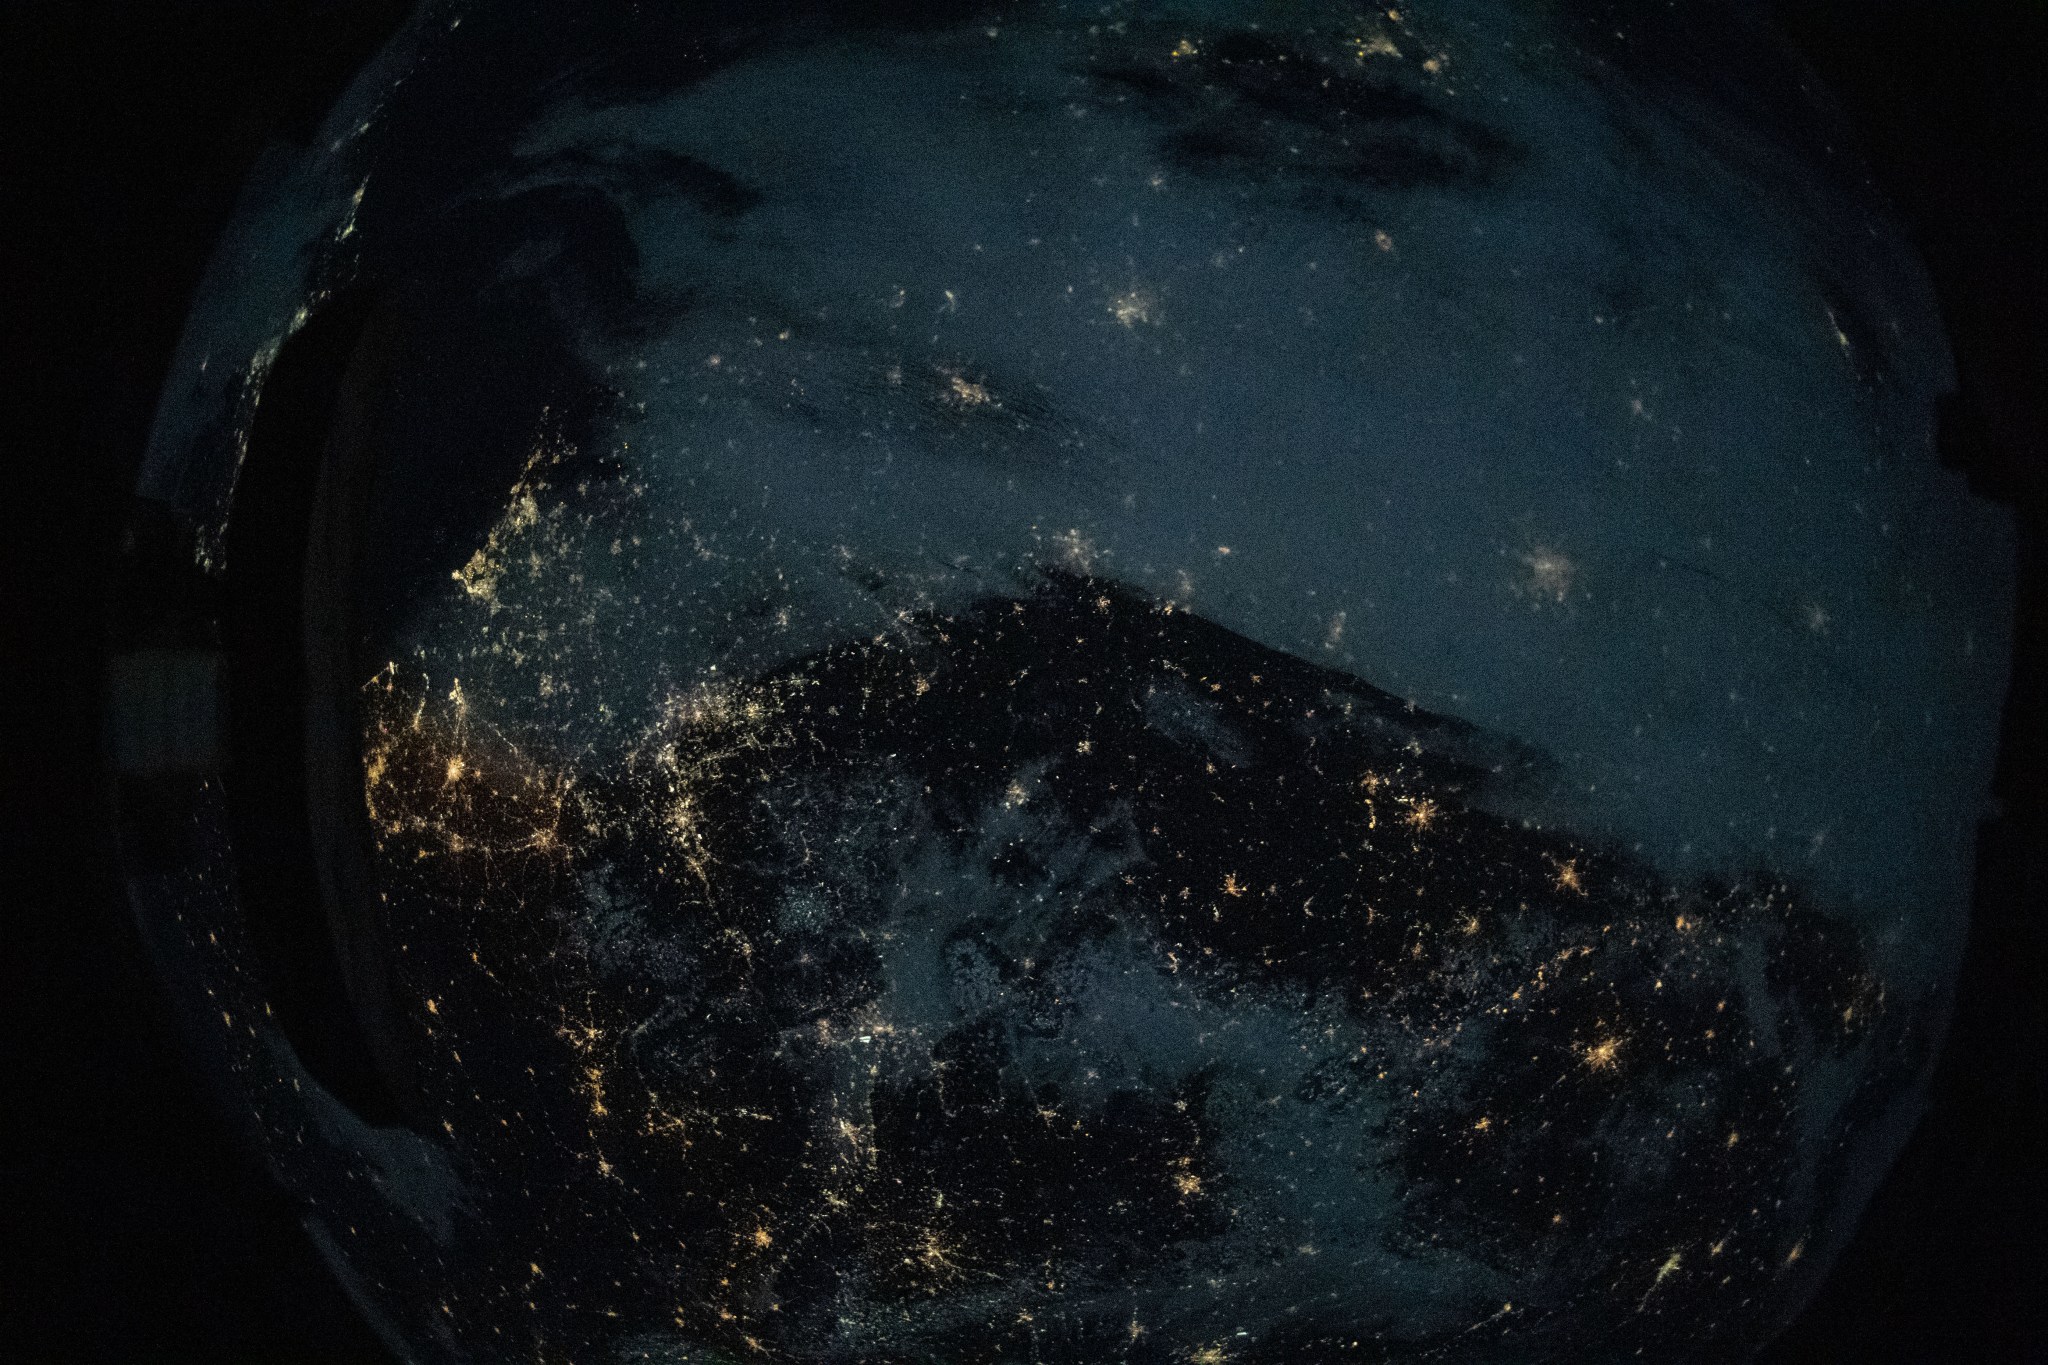 image of a continent with lights at night